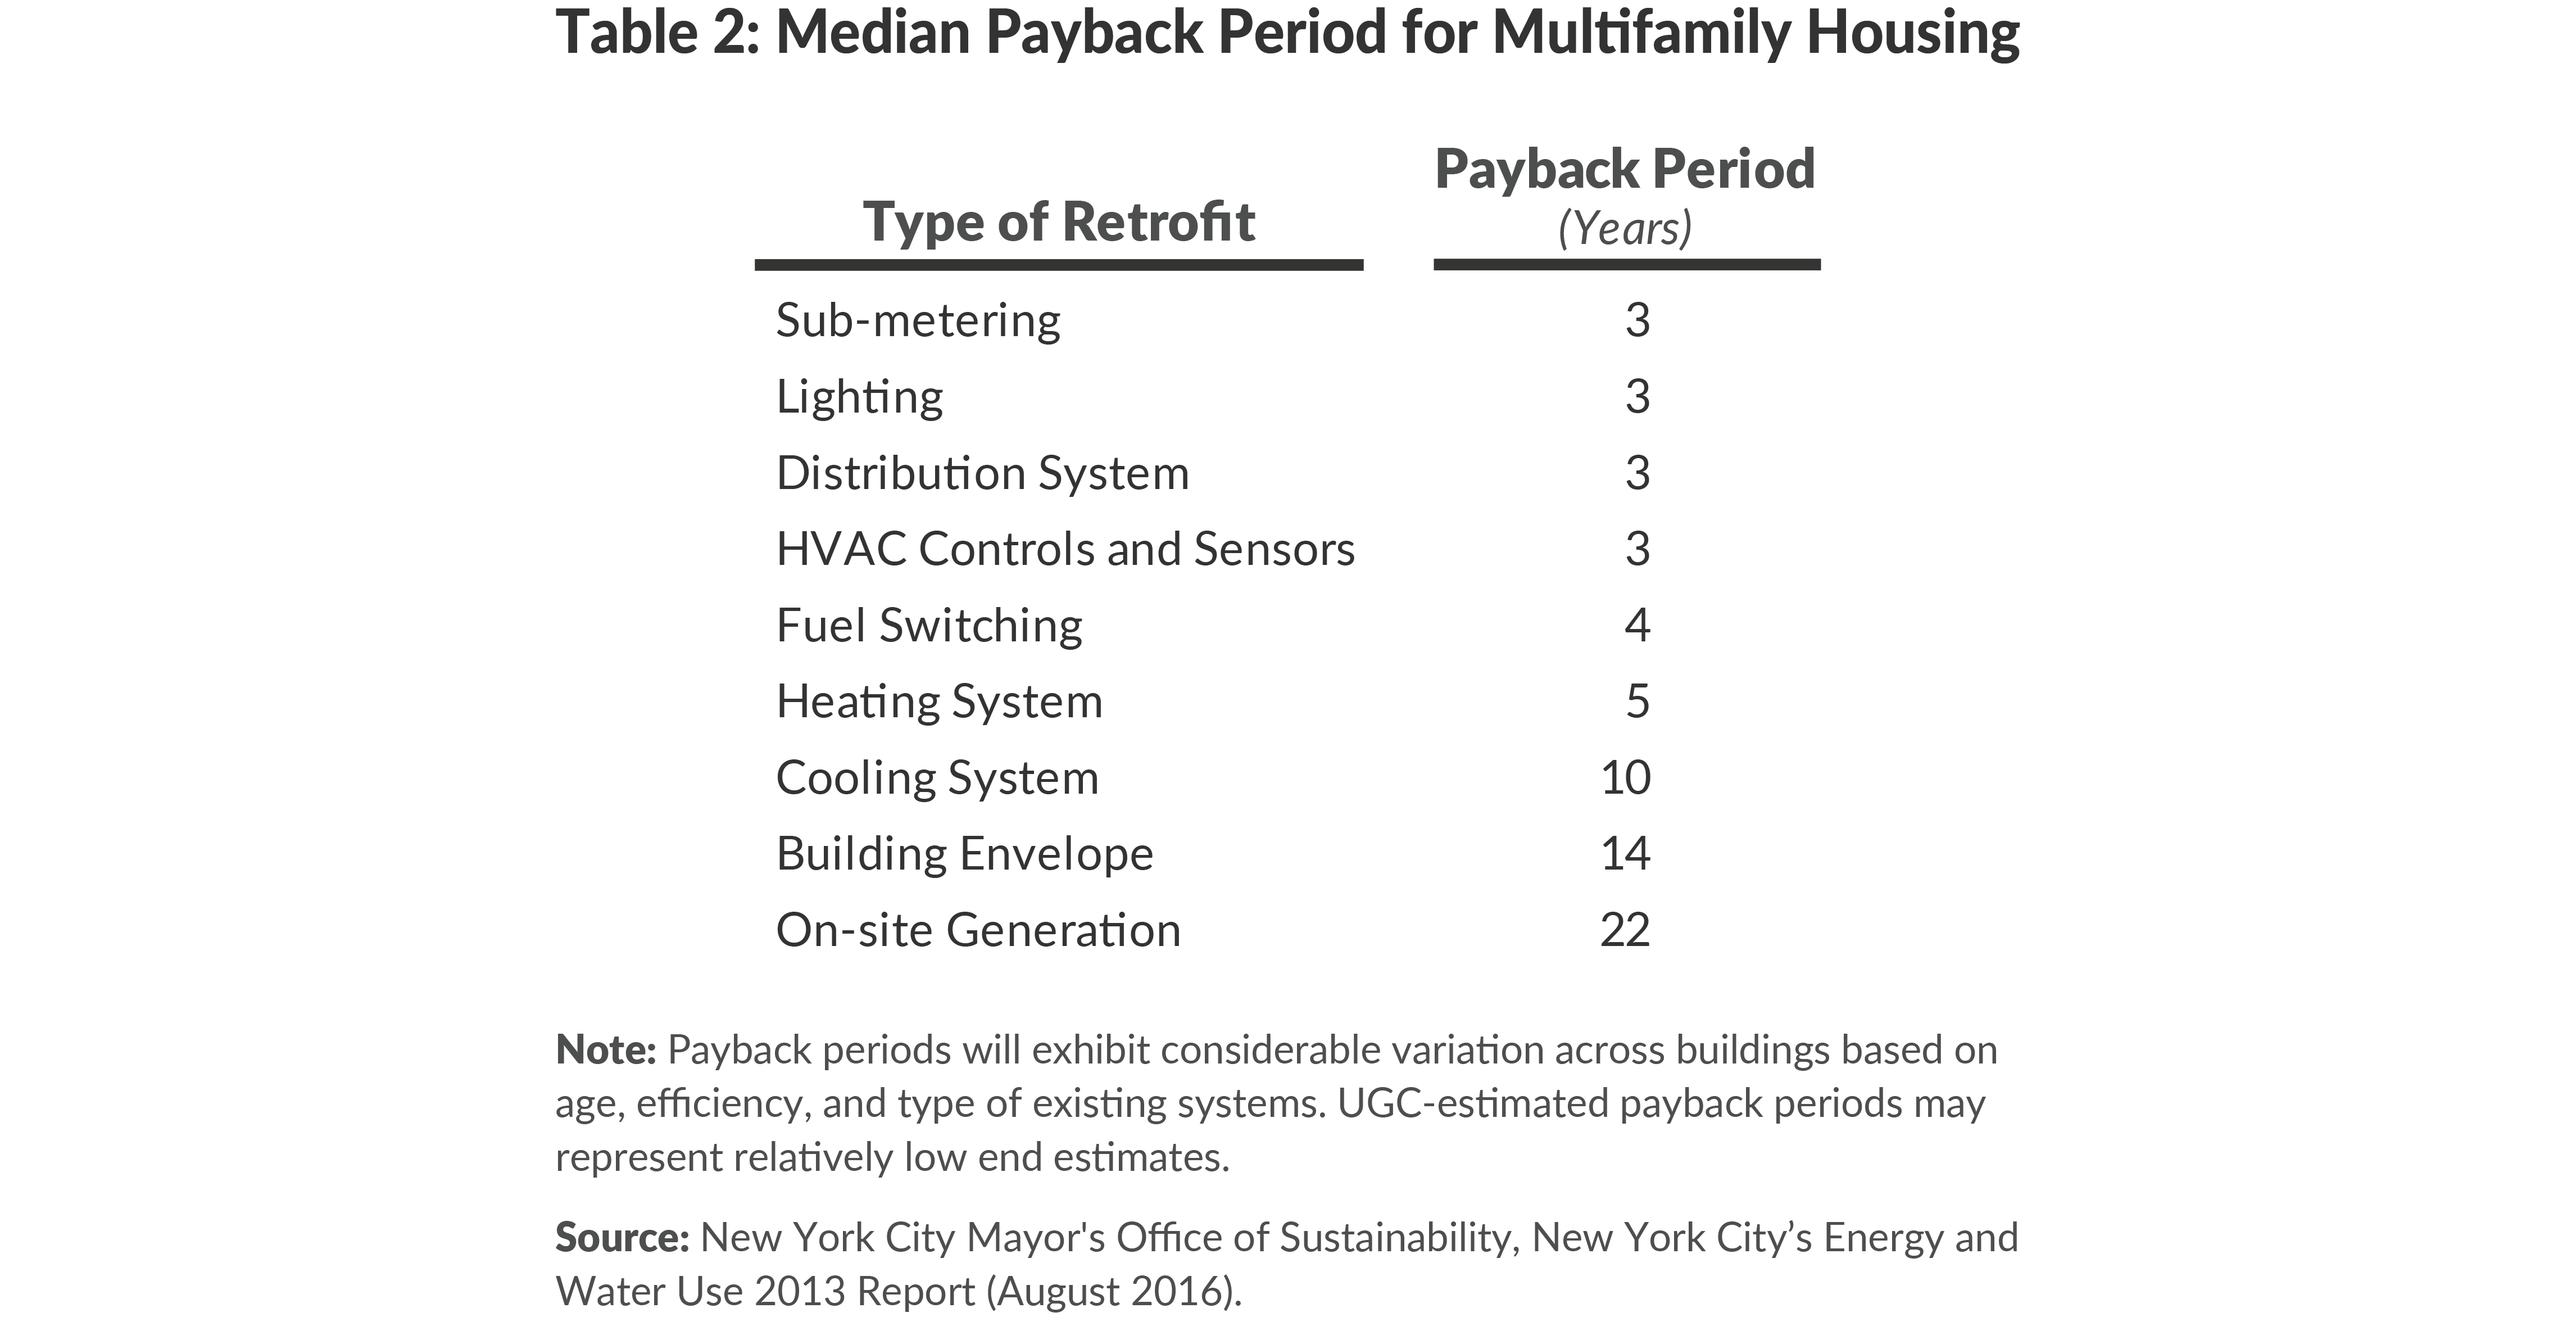 Table 2: Median Payback Period for Multifamily Housing